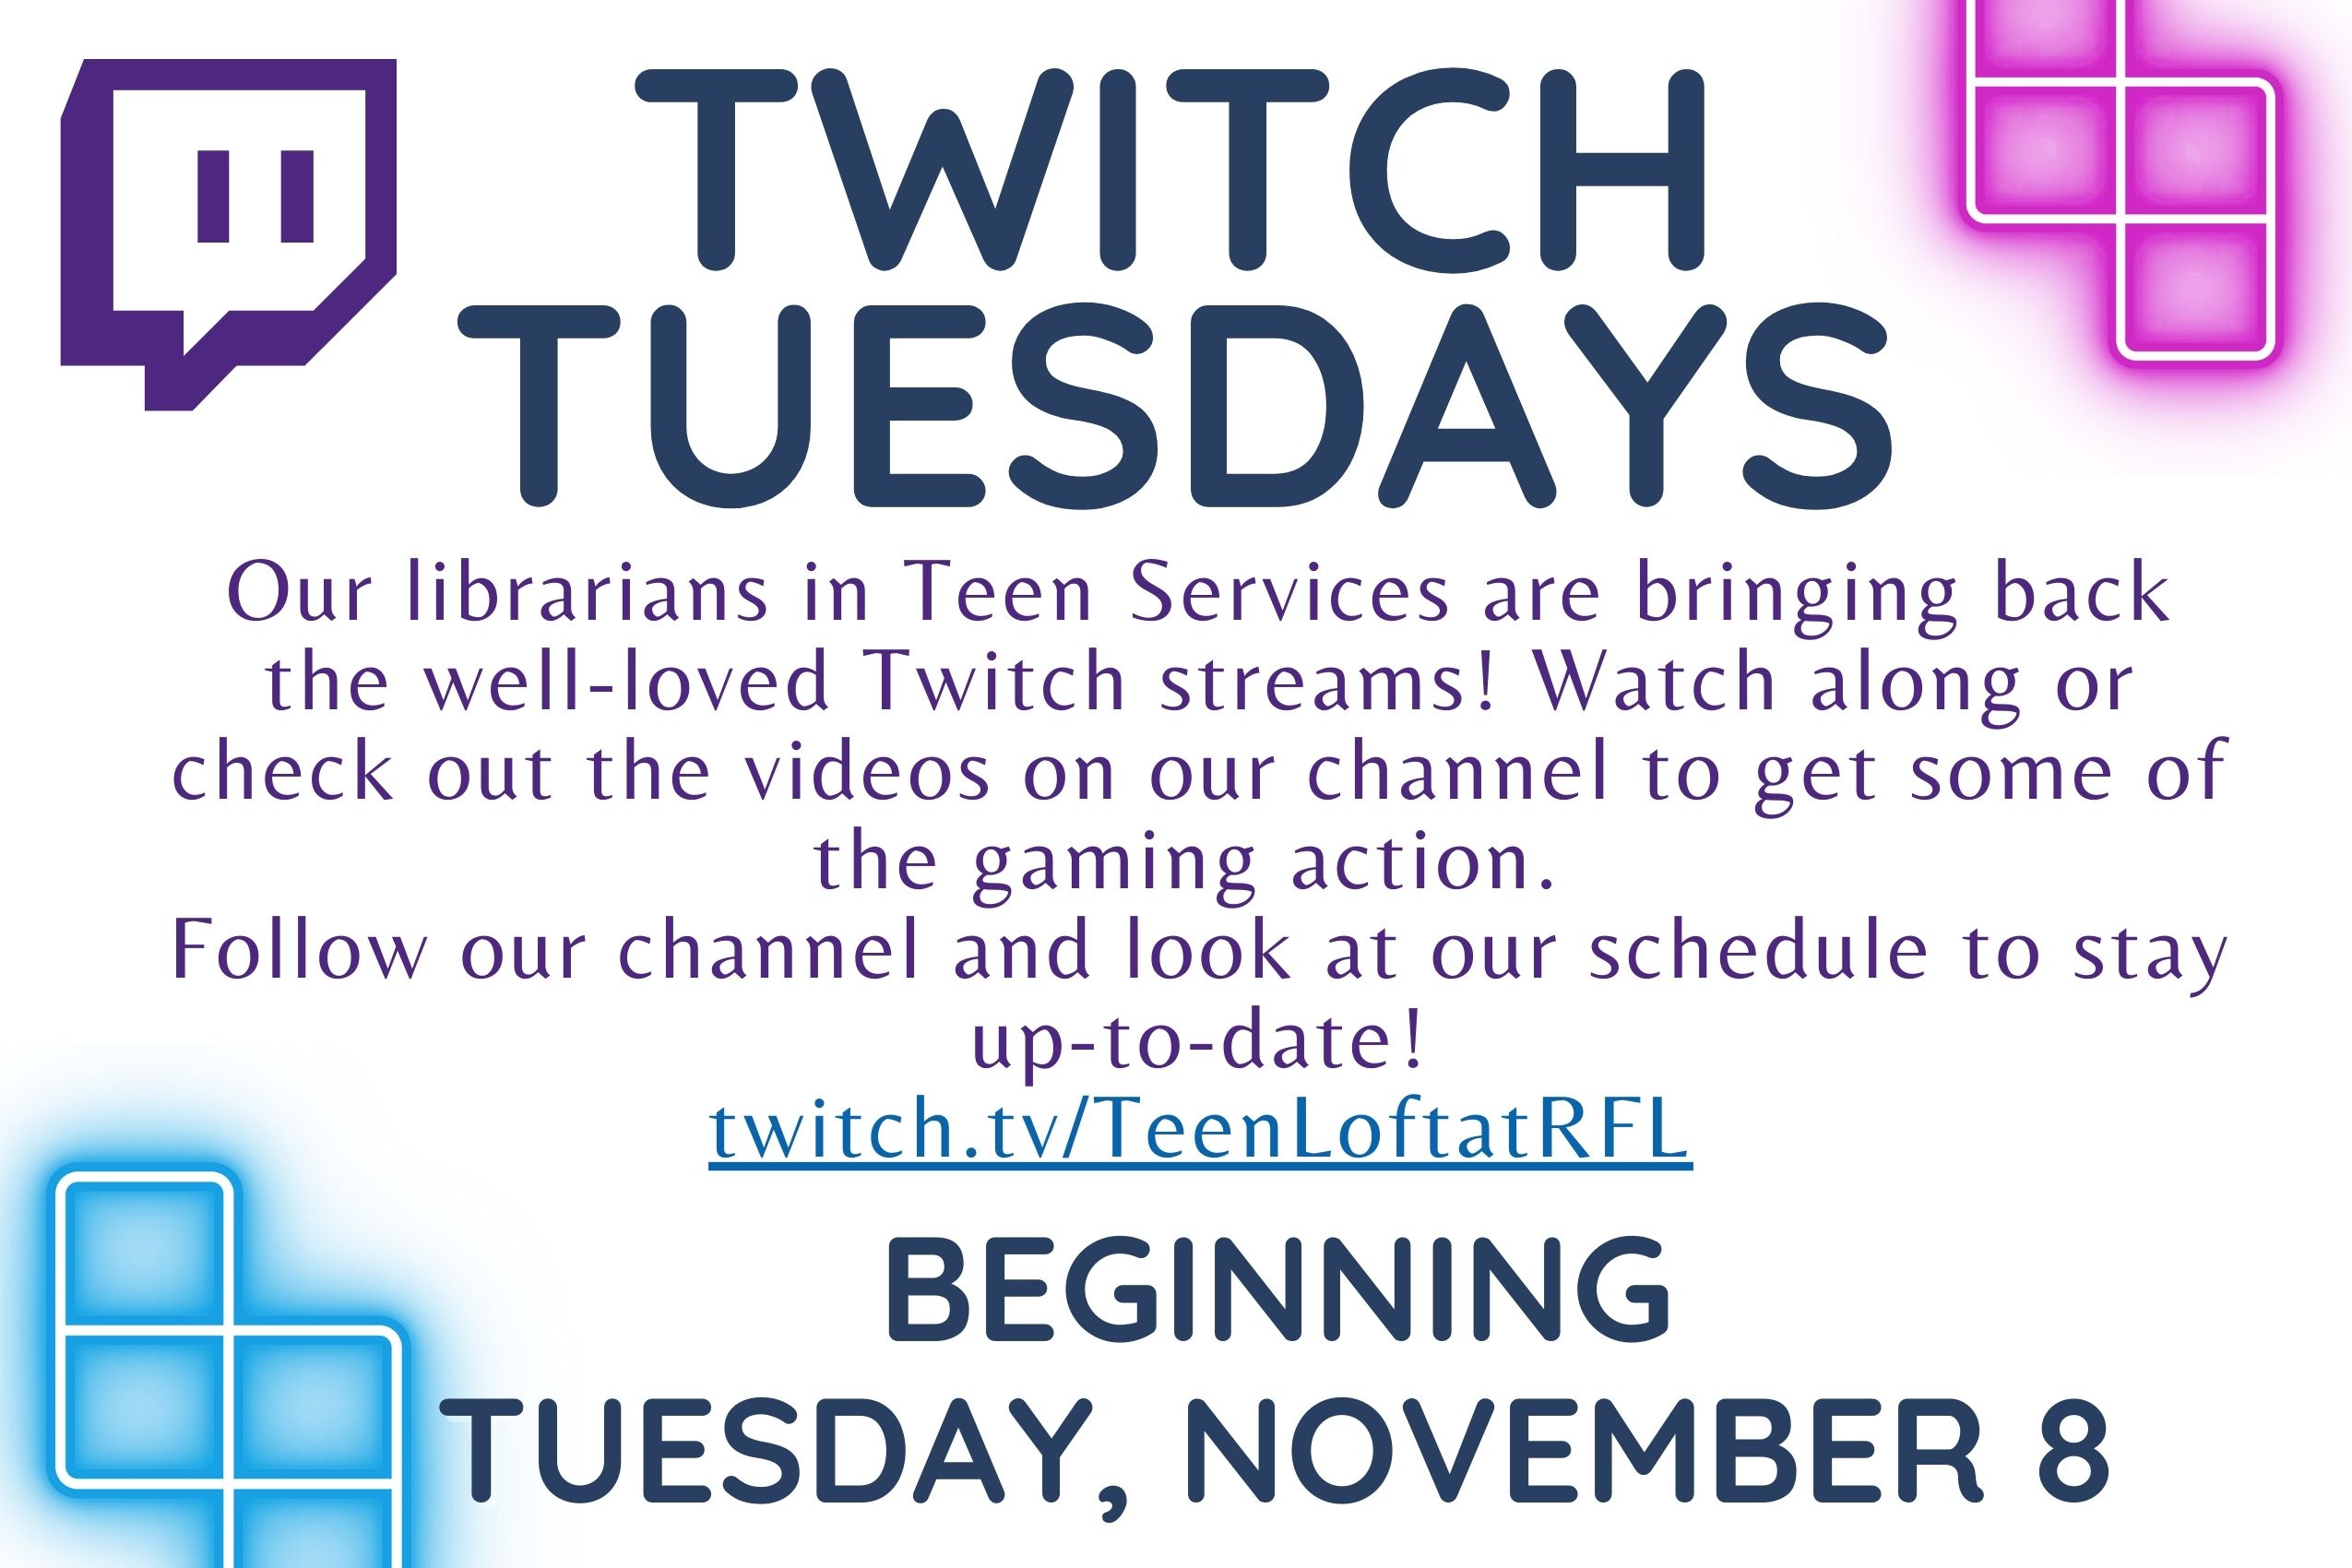 "Twitch Tuesdays. Our librarians in Teen Services are bringing back the well-loved Twitch streams! Watch along or check out the videos on our channel to get some of the gaming action. Follow our channel and look at our schedule to stay up-to-date! twitch.tv/TeenLoftatRFL. Beginning Tuesday, November 8th."